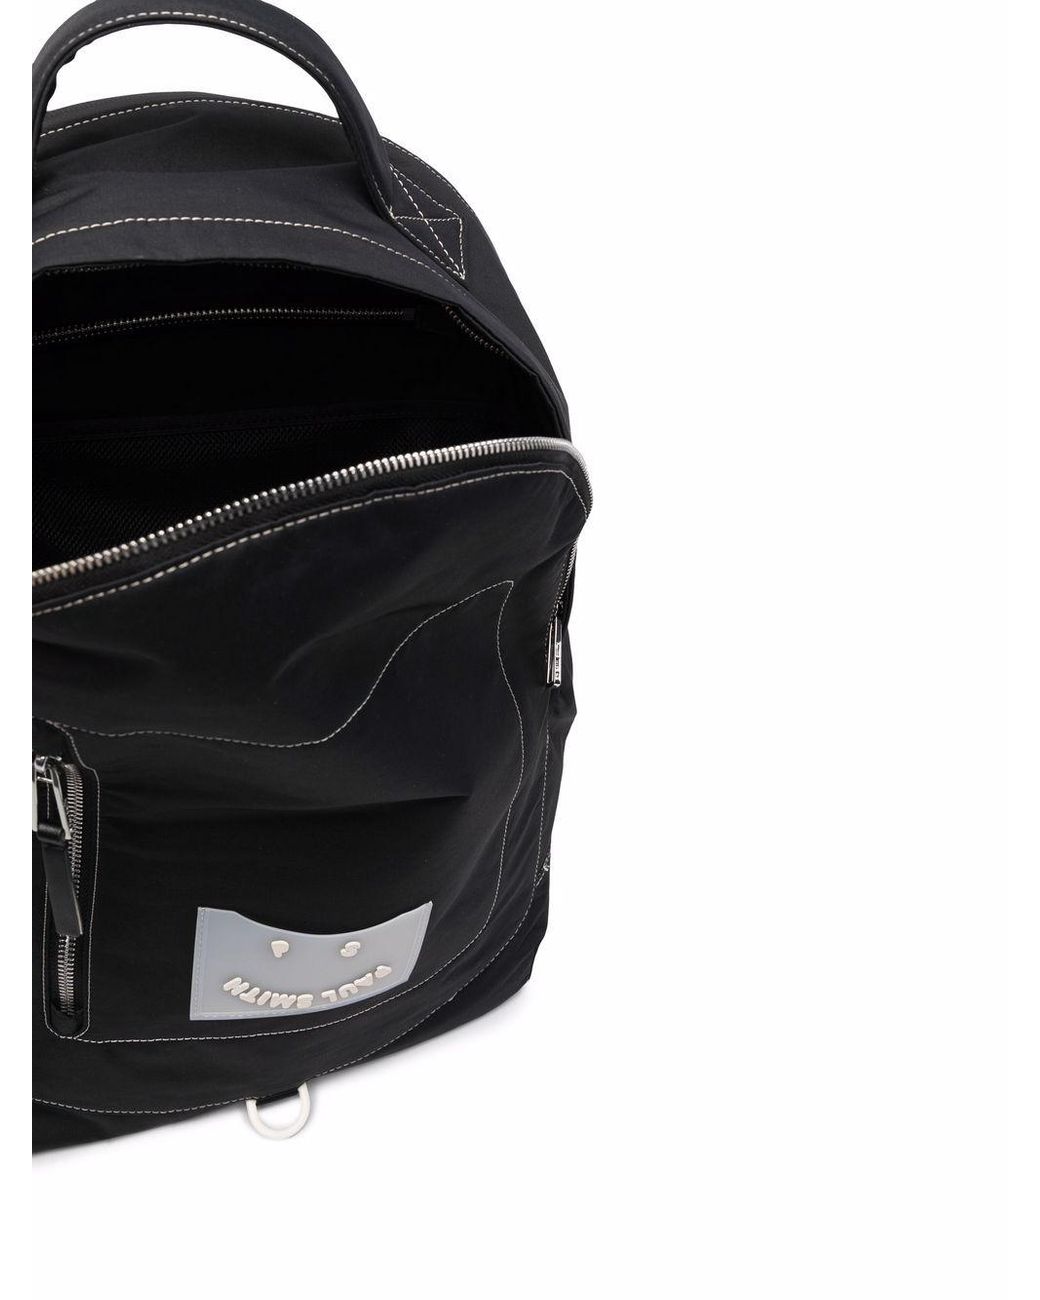 PS by Paul Smith Leather Logo Print Backpack in Black for Men - Lyst